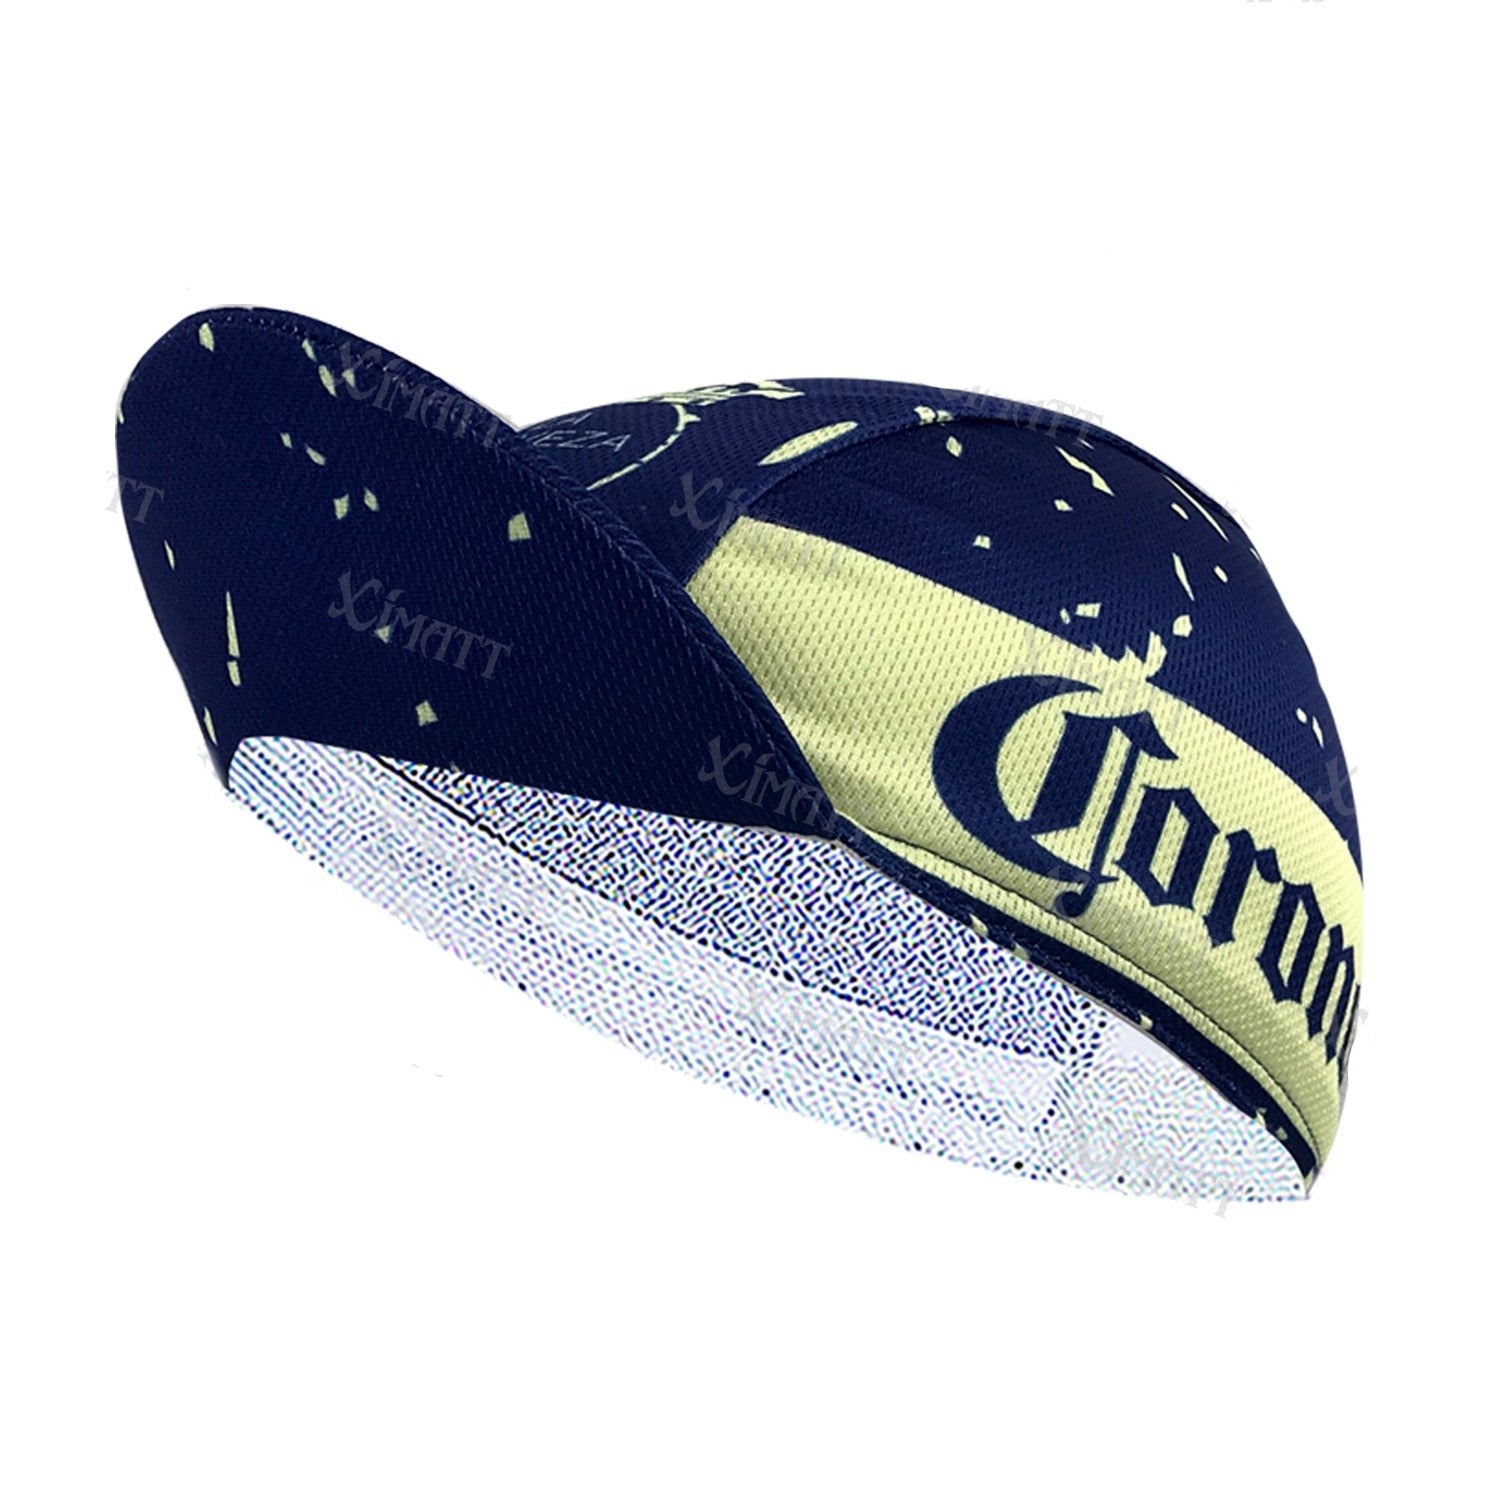 Retro Beer Series Polyester Cycling Cap Quick Dry Sweat Wicking Apply To Road Bike Motorcycle Run More Outdoor Sports